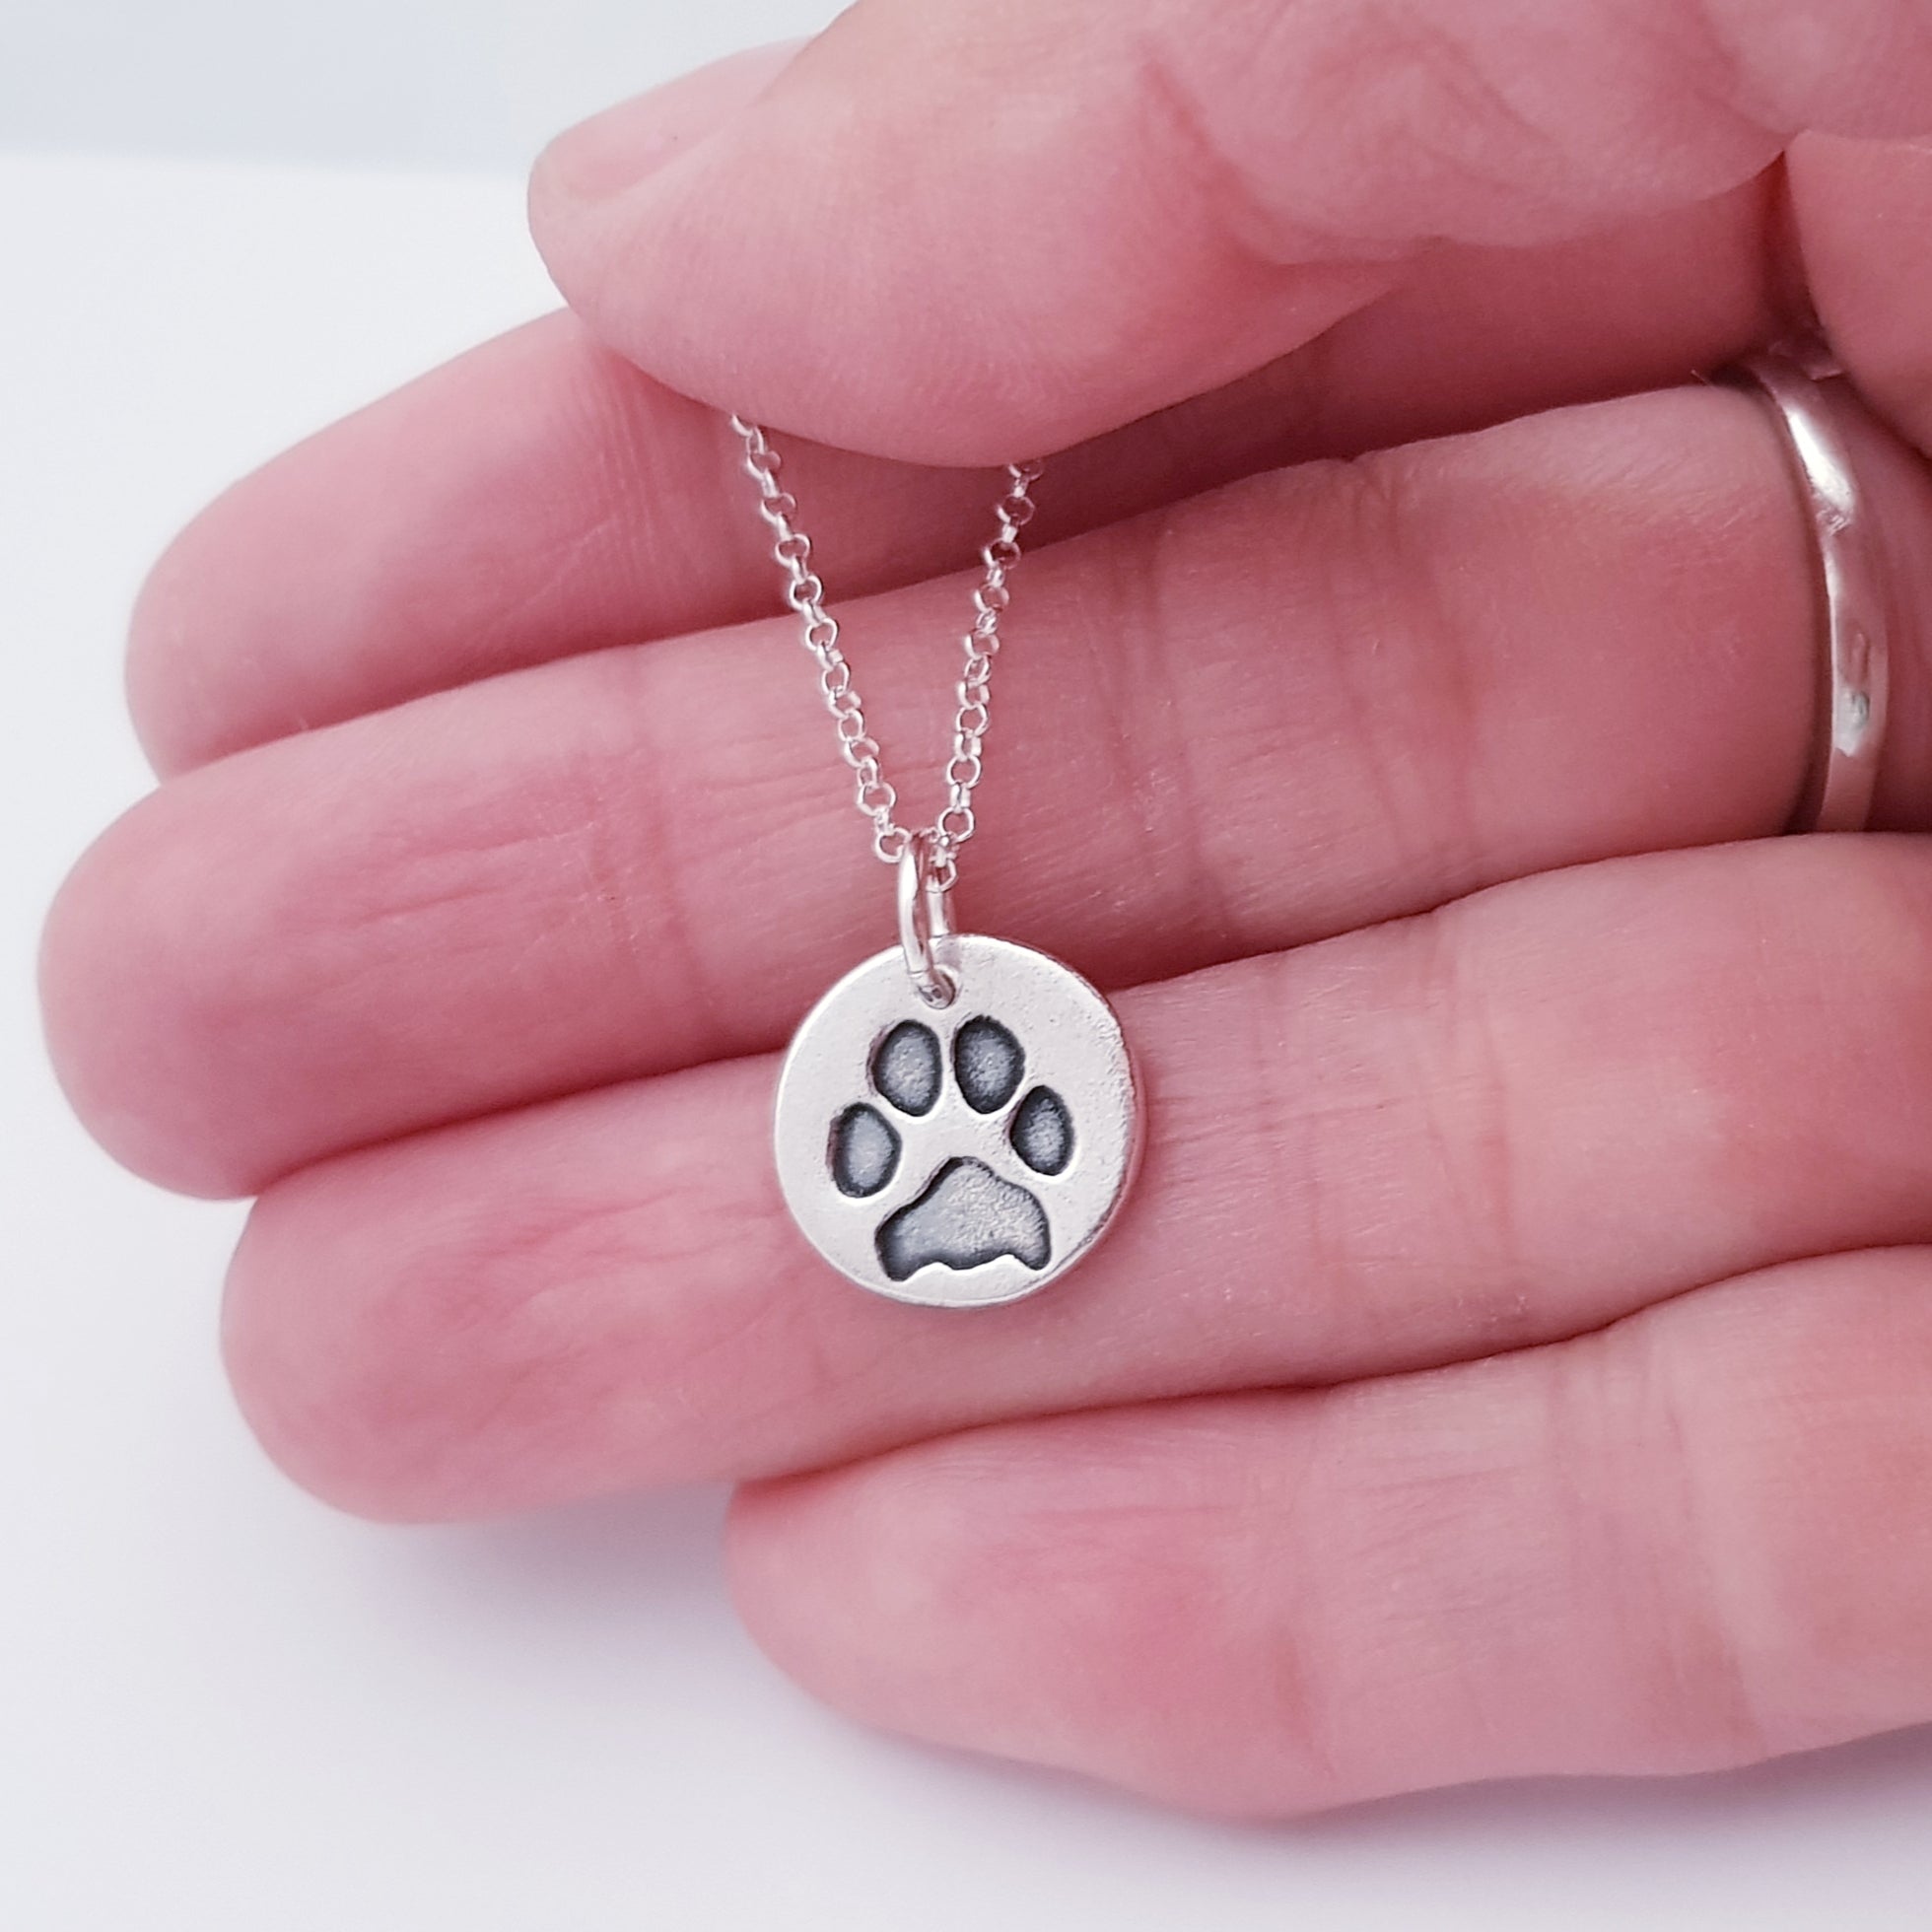 Sterling Silver Paw Print Necklace By PoppyK | notonthehighstreet.com